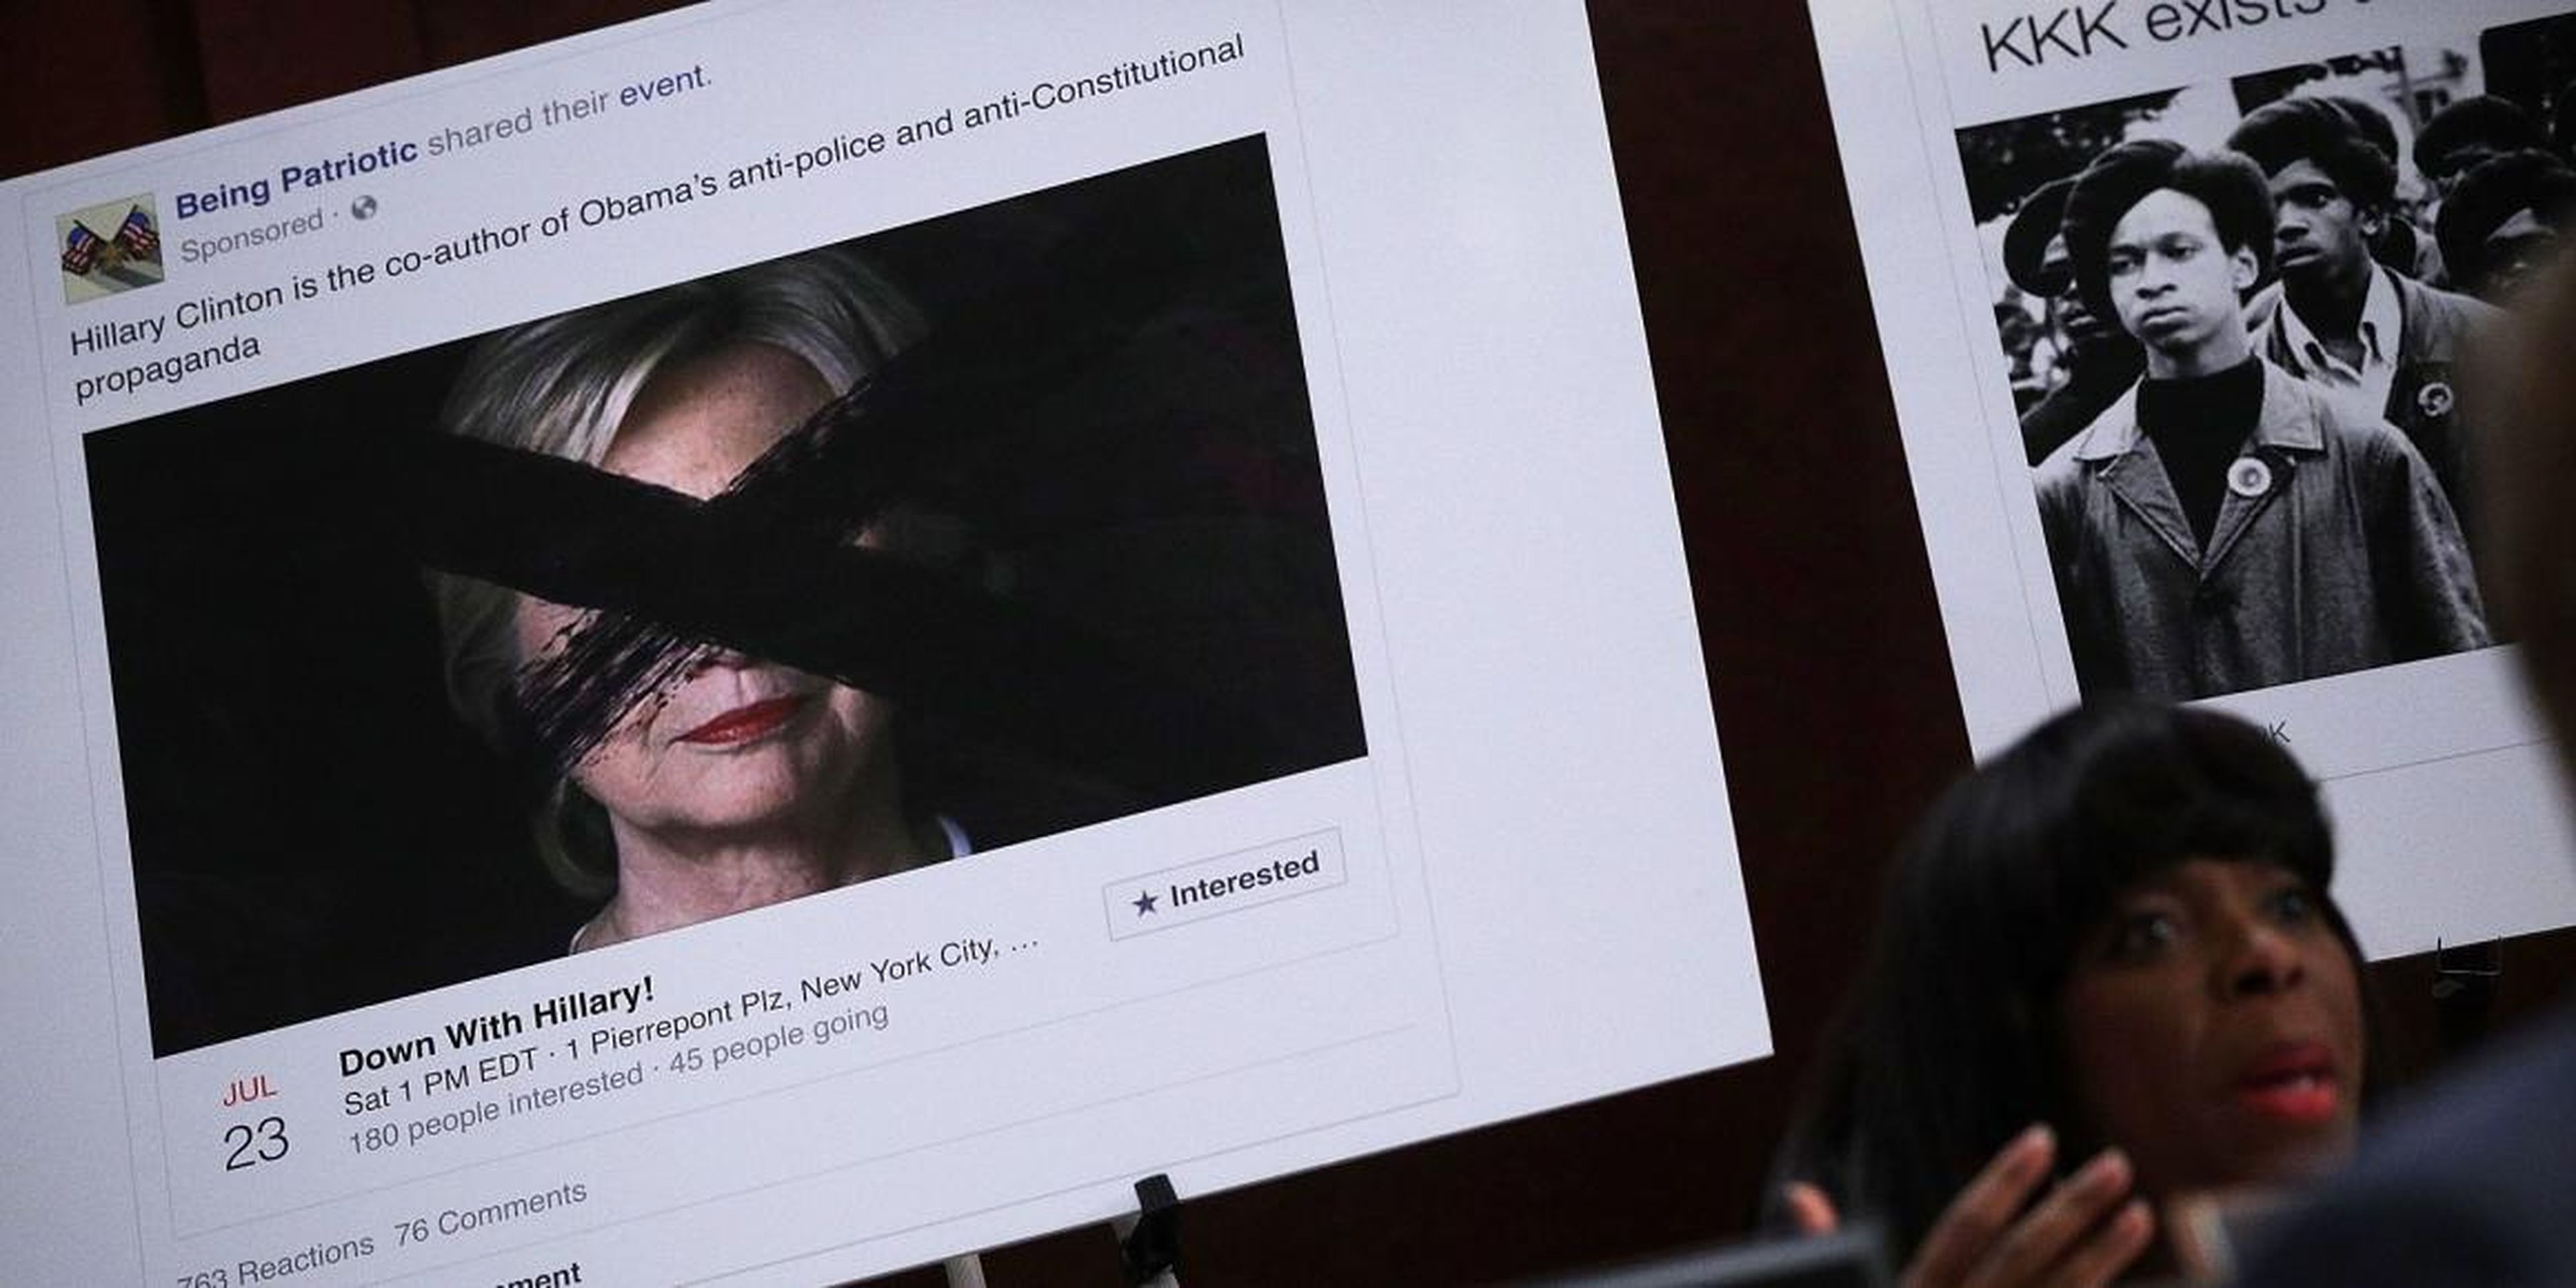 A printout of a social-media post targeting the former Democratic presidential candidate Hillary Clinton.